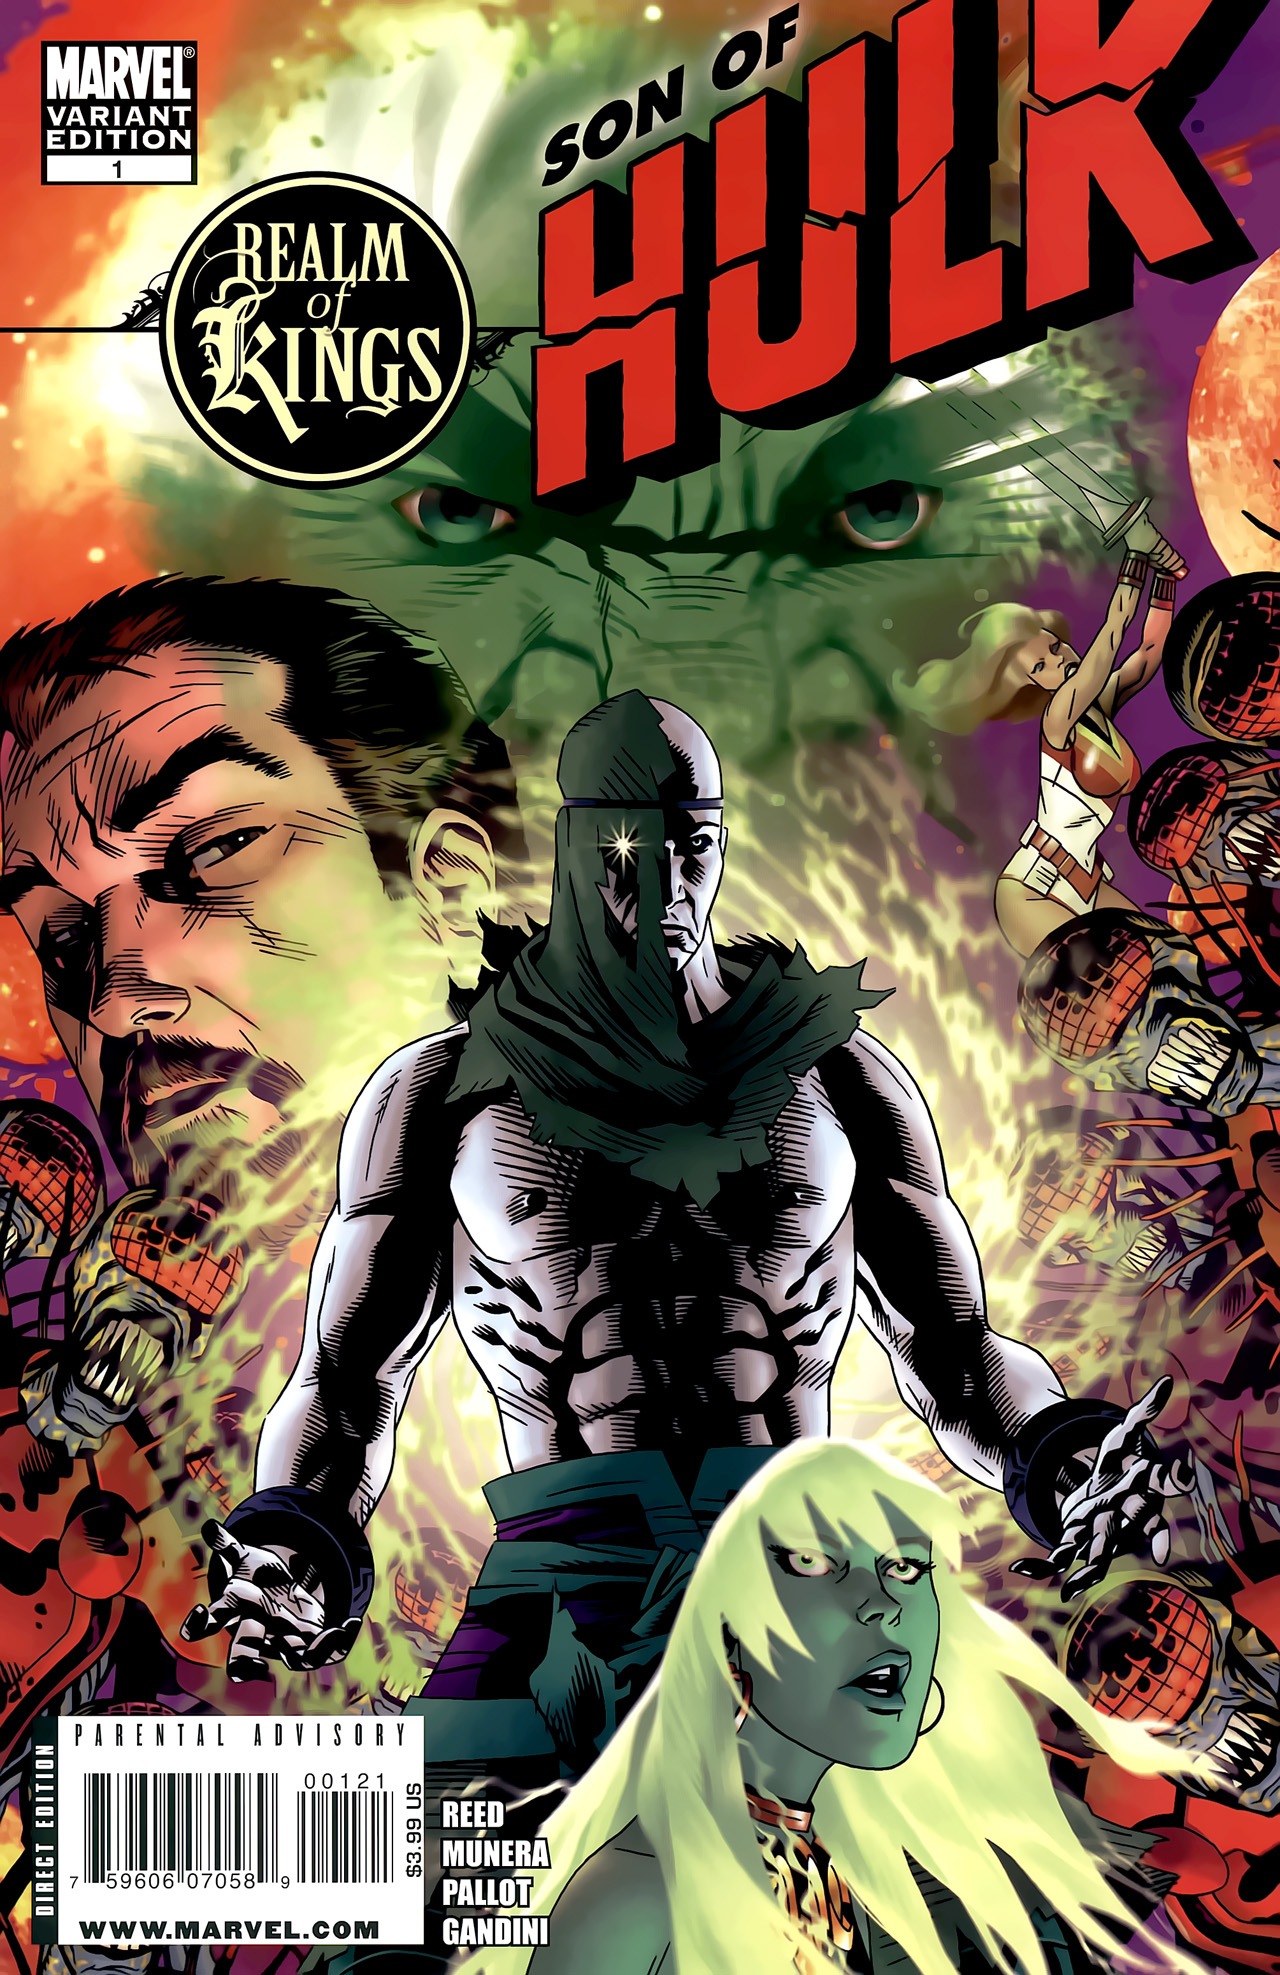 Read online Realm of Kings: Son of Hulk comic -  Issue #1 - 2